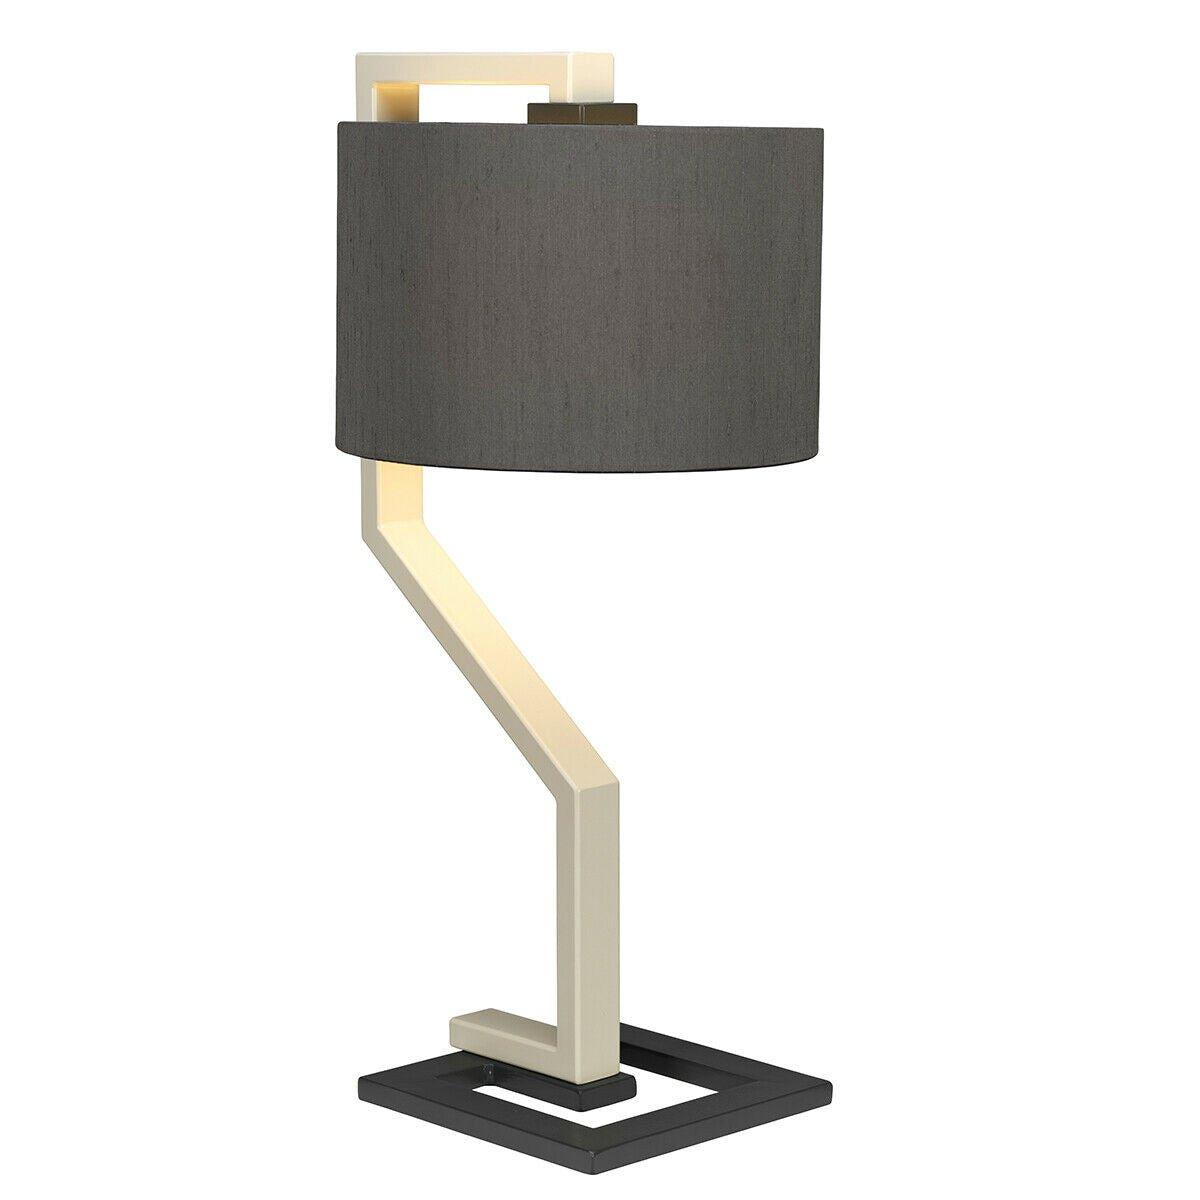 Table Lamp Whale Shade Cream And Dark Grey Painted Metal Base LED E27 60W Bulb